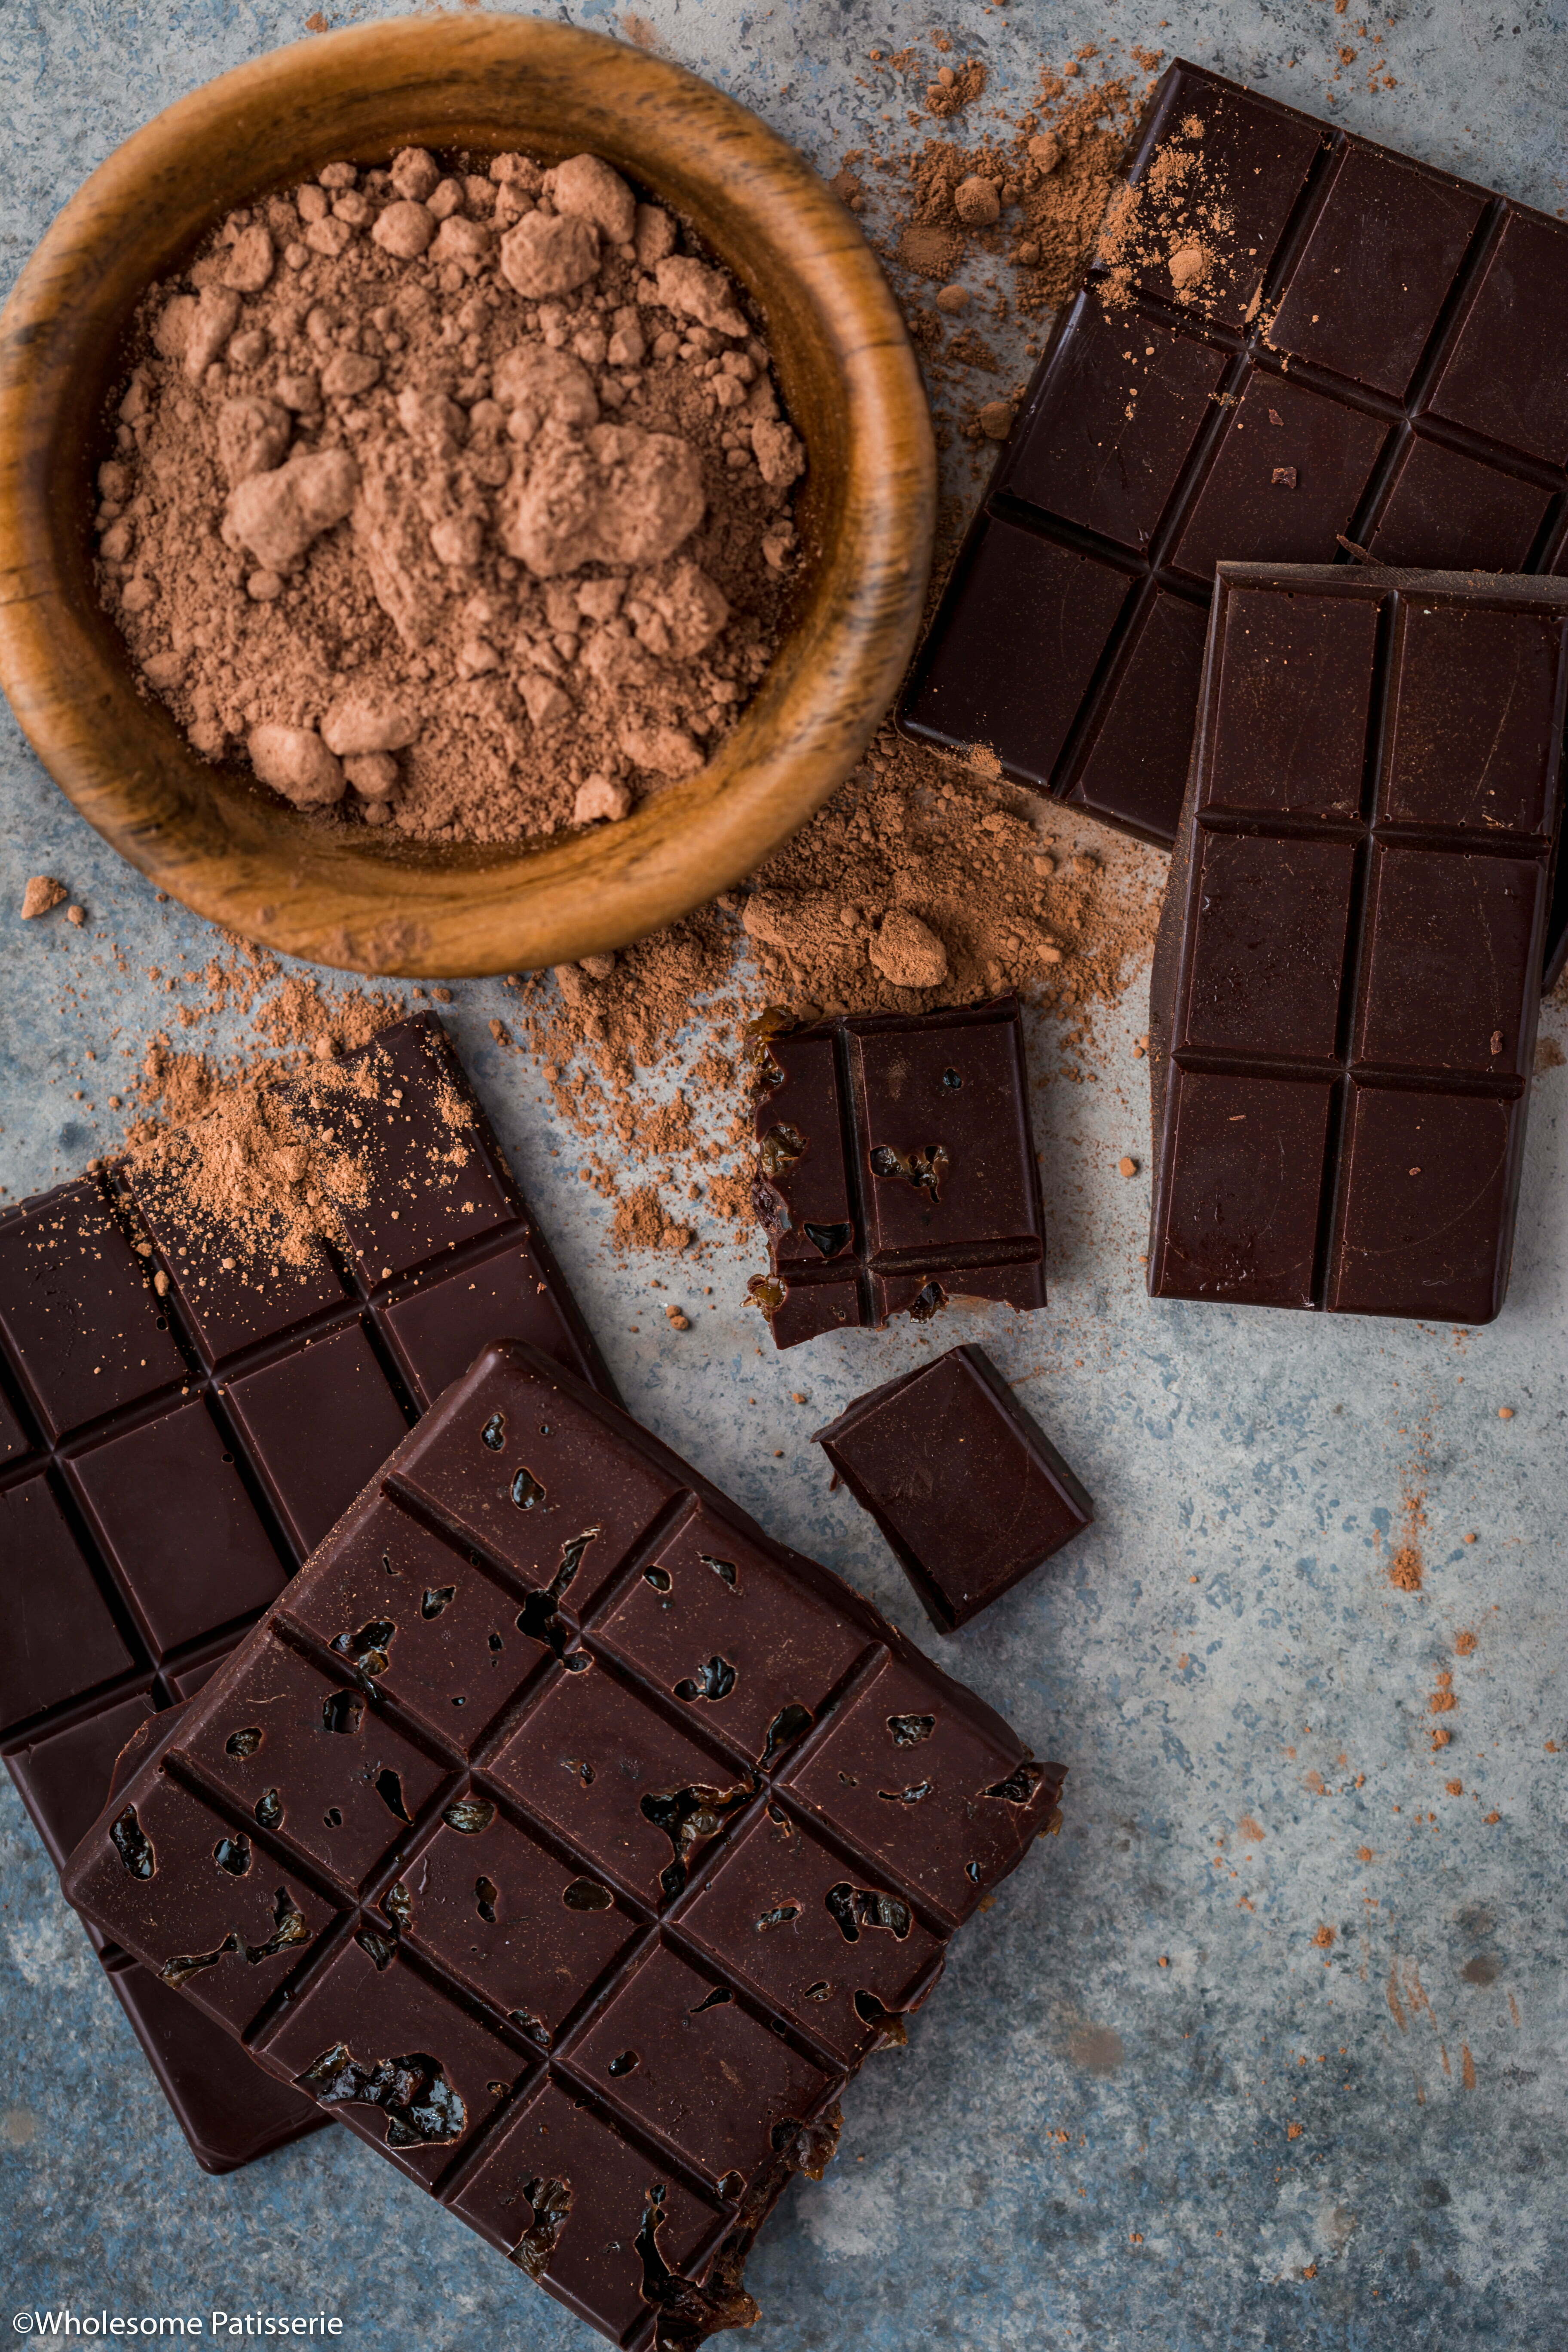 Homemade Chocolate Blocks! With zero dairy added! This is your new go-to chocolate sweet treat recipe. Say goodbye to buying your supermarket chocolate blocks, that likely contain ingredients you don’t want in your chocolate!